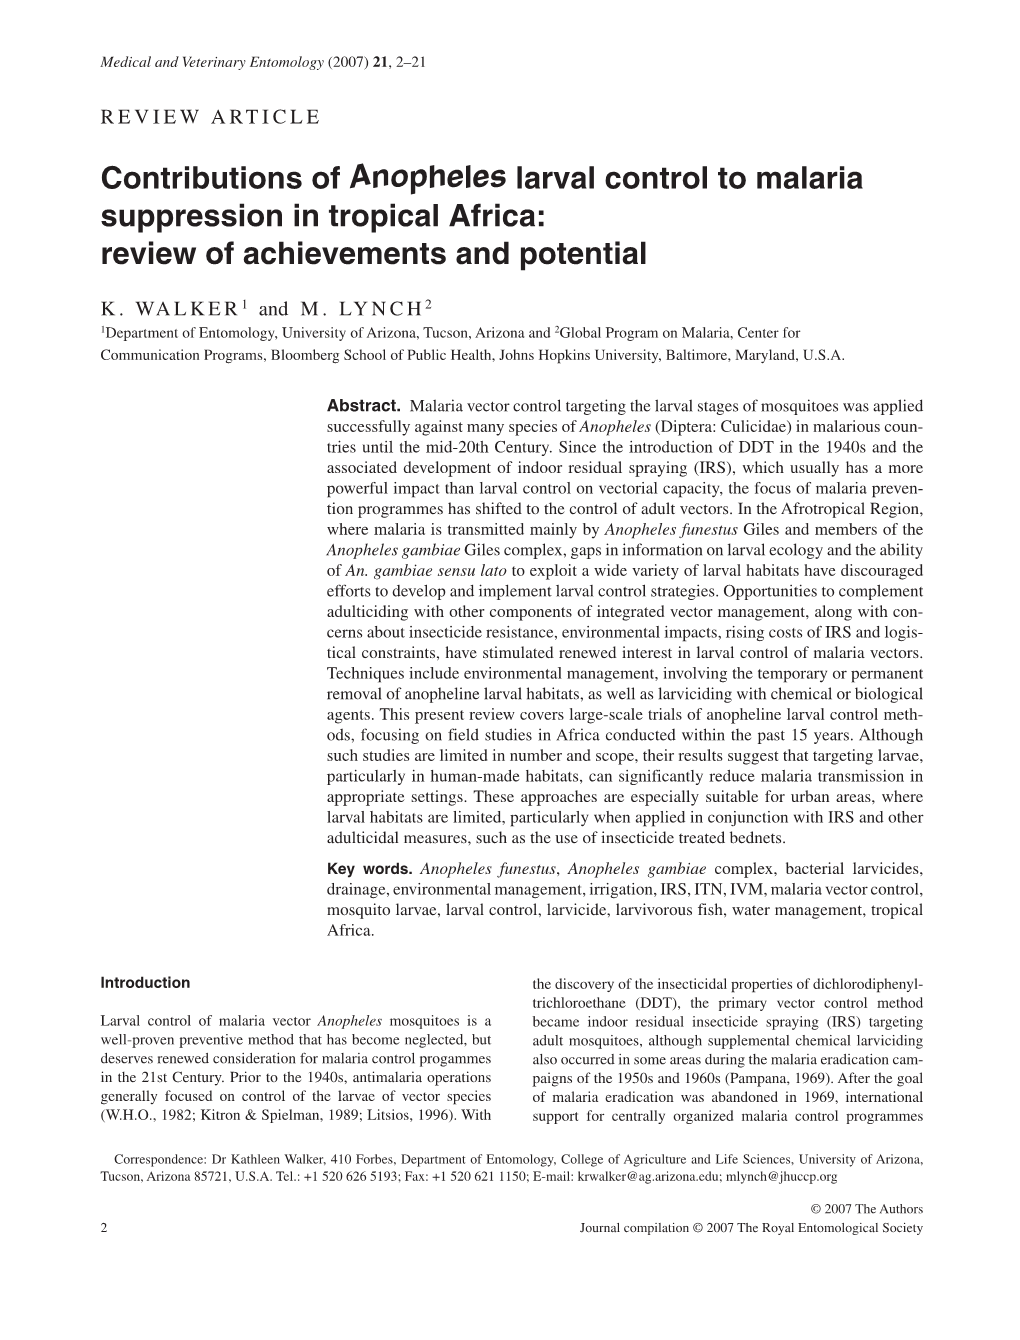 Contributions of Anopheles Larval Control to Malaria Suppression in Tropical Africa: Review of Achievements and Potential